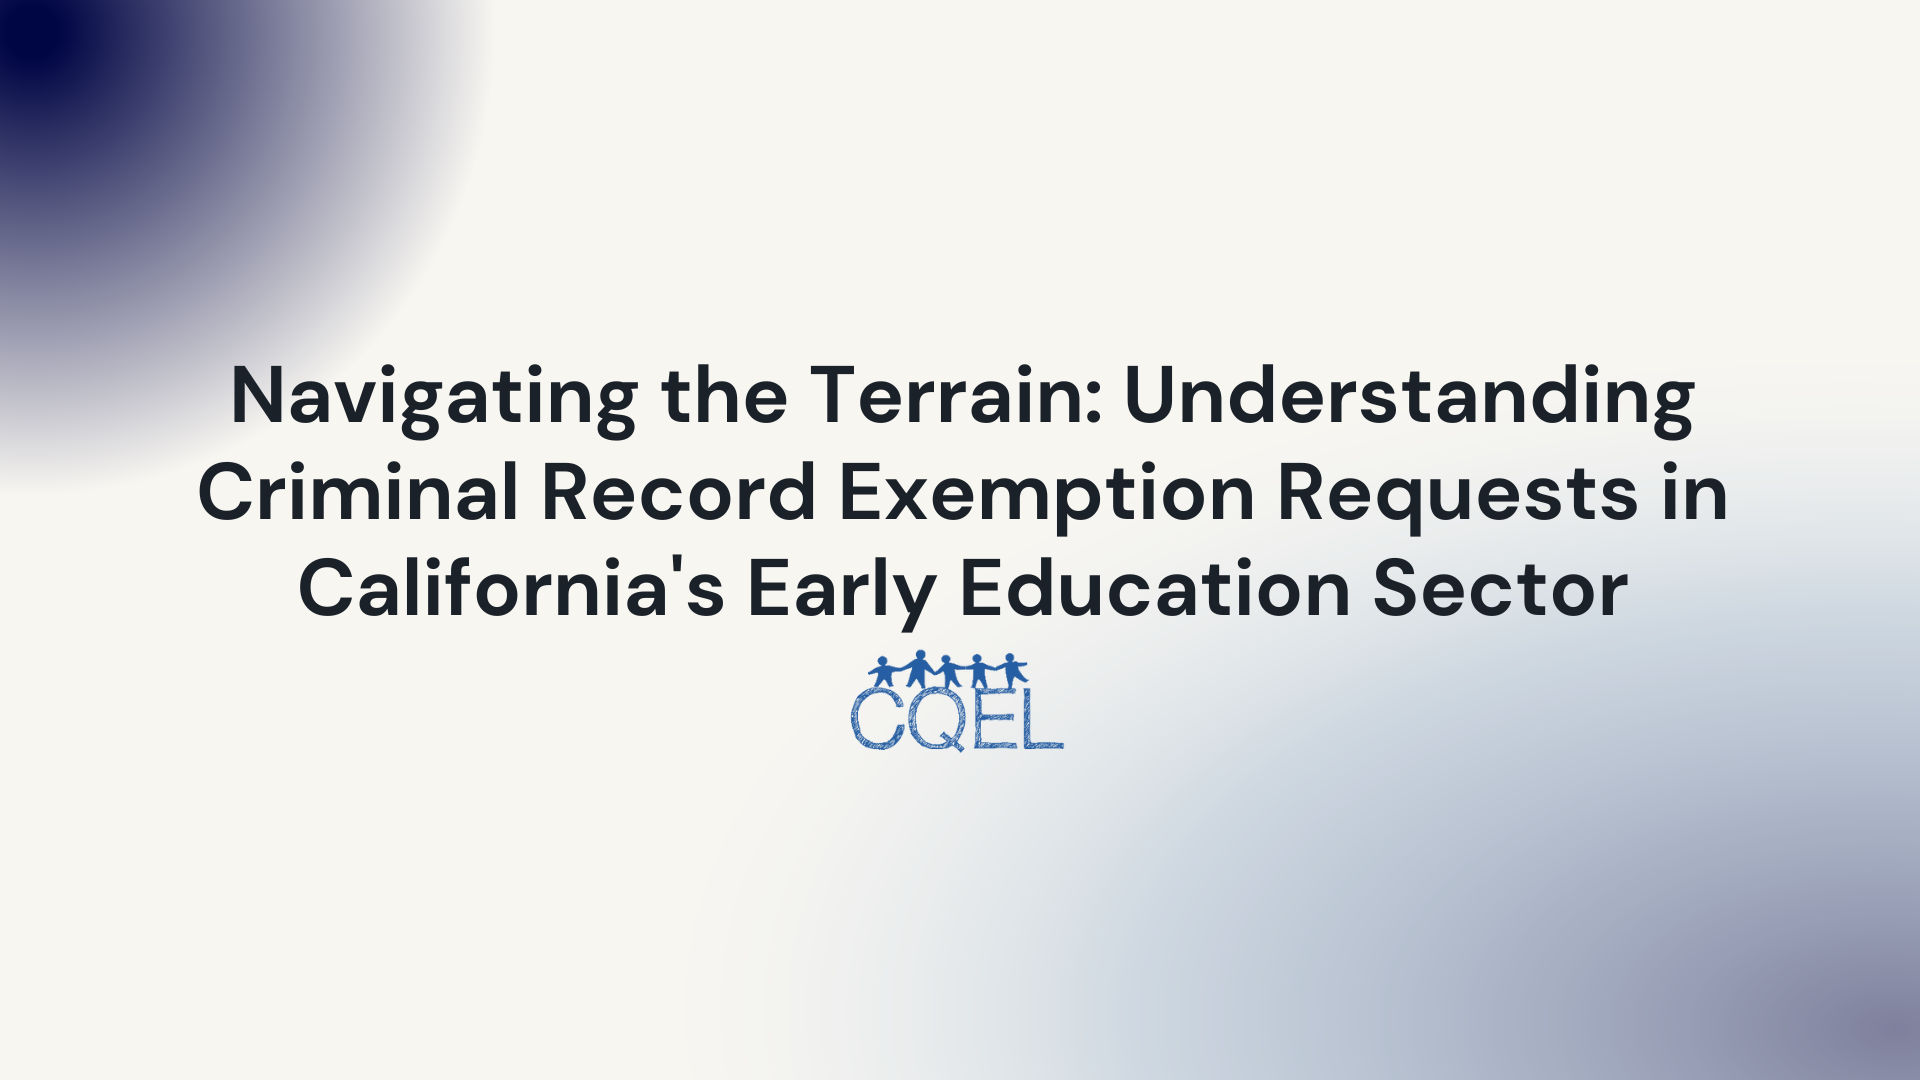 Navigating the Terrain: Understanding Criminal Record Exemption Requests in California's Early Education Sector